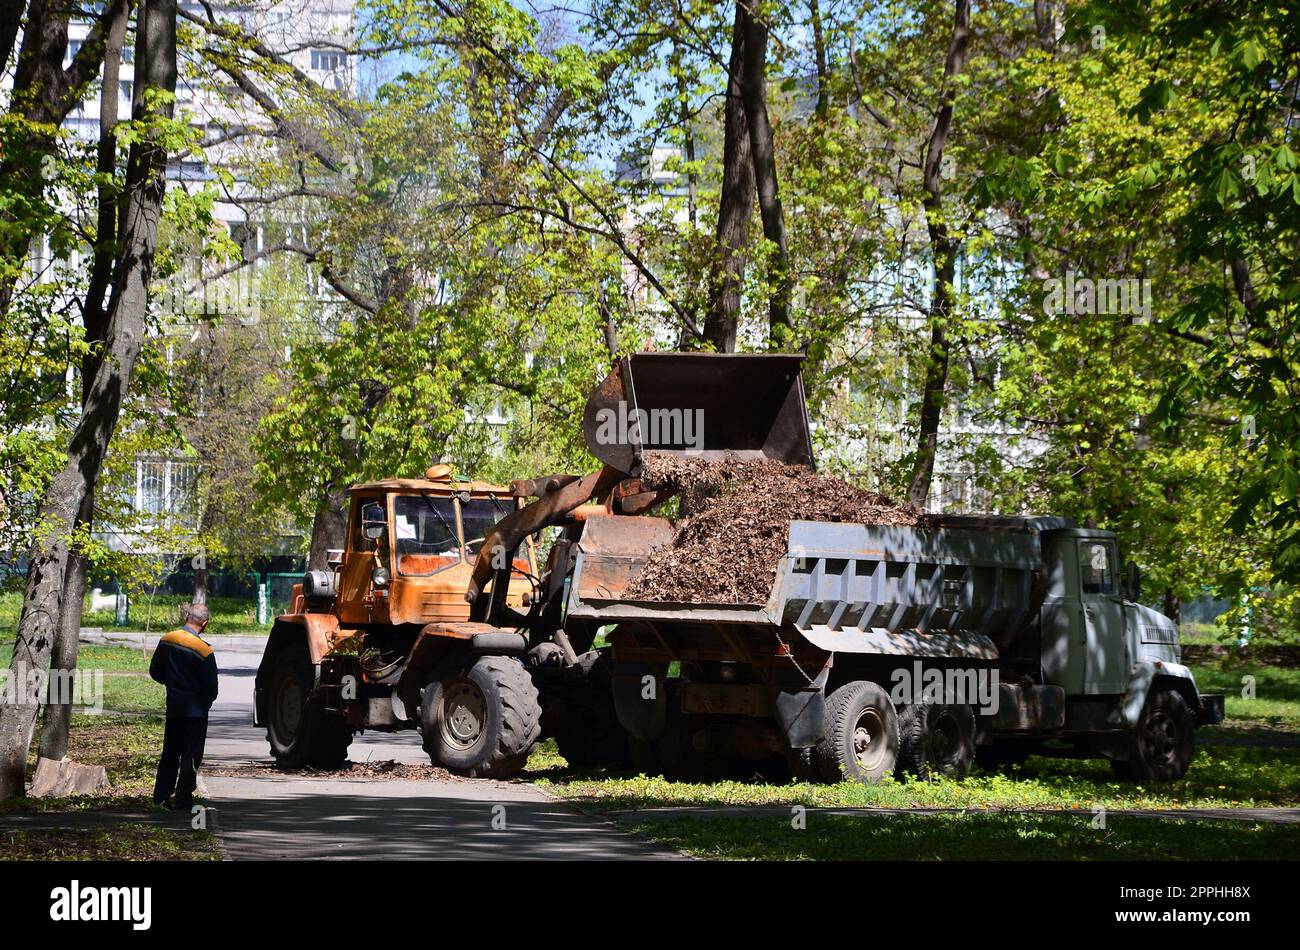 The city improvement team removes the fallen leaves in the park with an excavator and a truck. Regular seasonal work on improving the public places for recreation Stock Photo